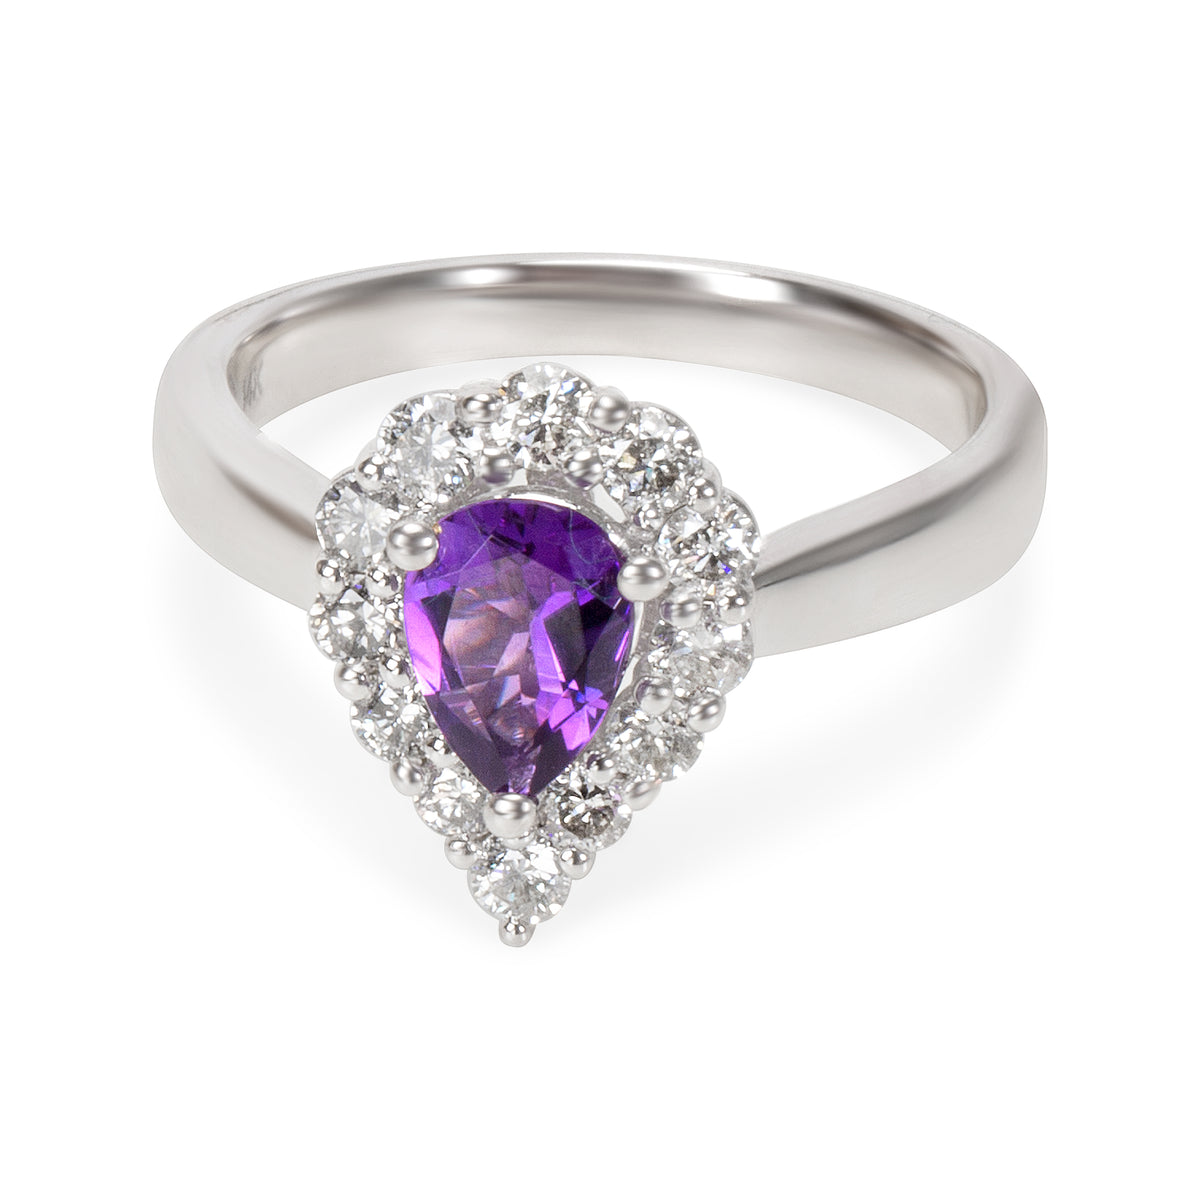 BRAND NEW Diamond Halo Pear Shape Amethyst Ring in 14k White Gold (0.60 CTW)